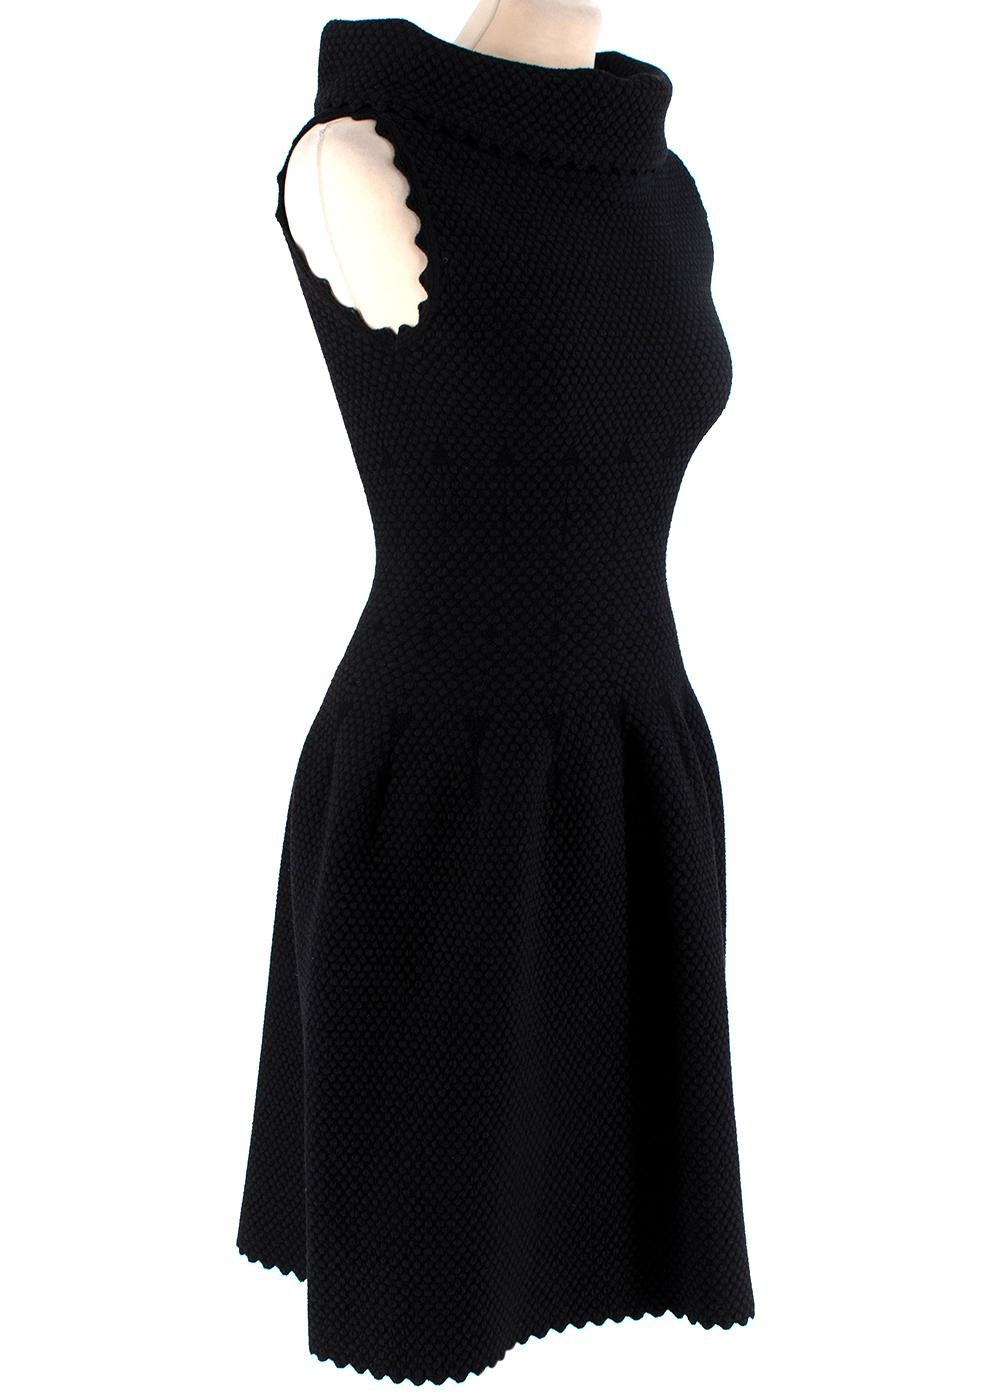 Alaia Textured Wool Black Fitted Scalloped Mini Dress

-Textured 
-Skater style
-High roll neck
-Scalloped-edge trim on neck and hem 
-Sleeveless

Material:
50% Wool 
25% Viscose
20% Polyamide
5% Polyester

Made In Italy 

Dry clean only 

PLEASE